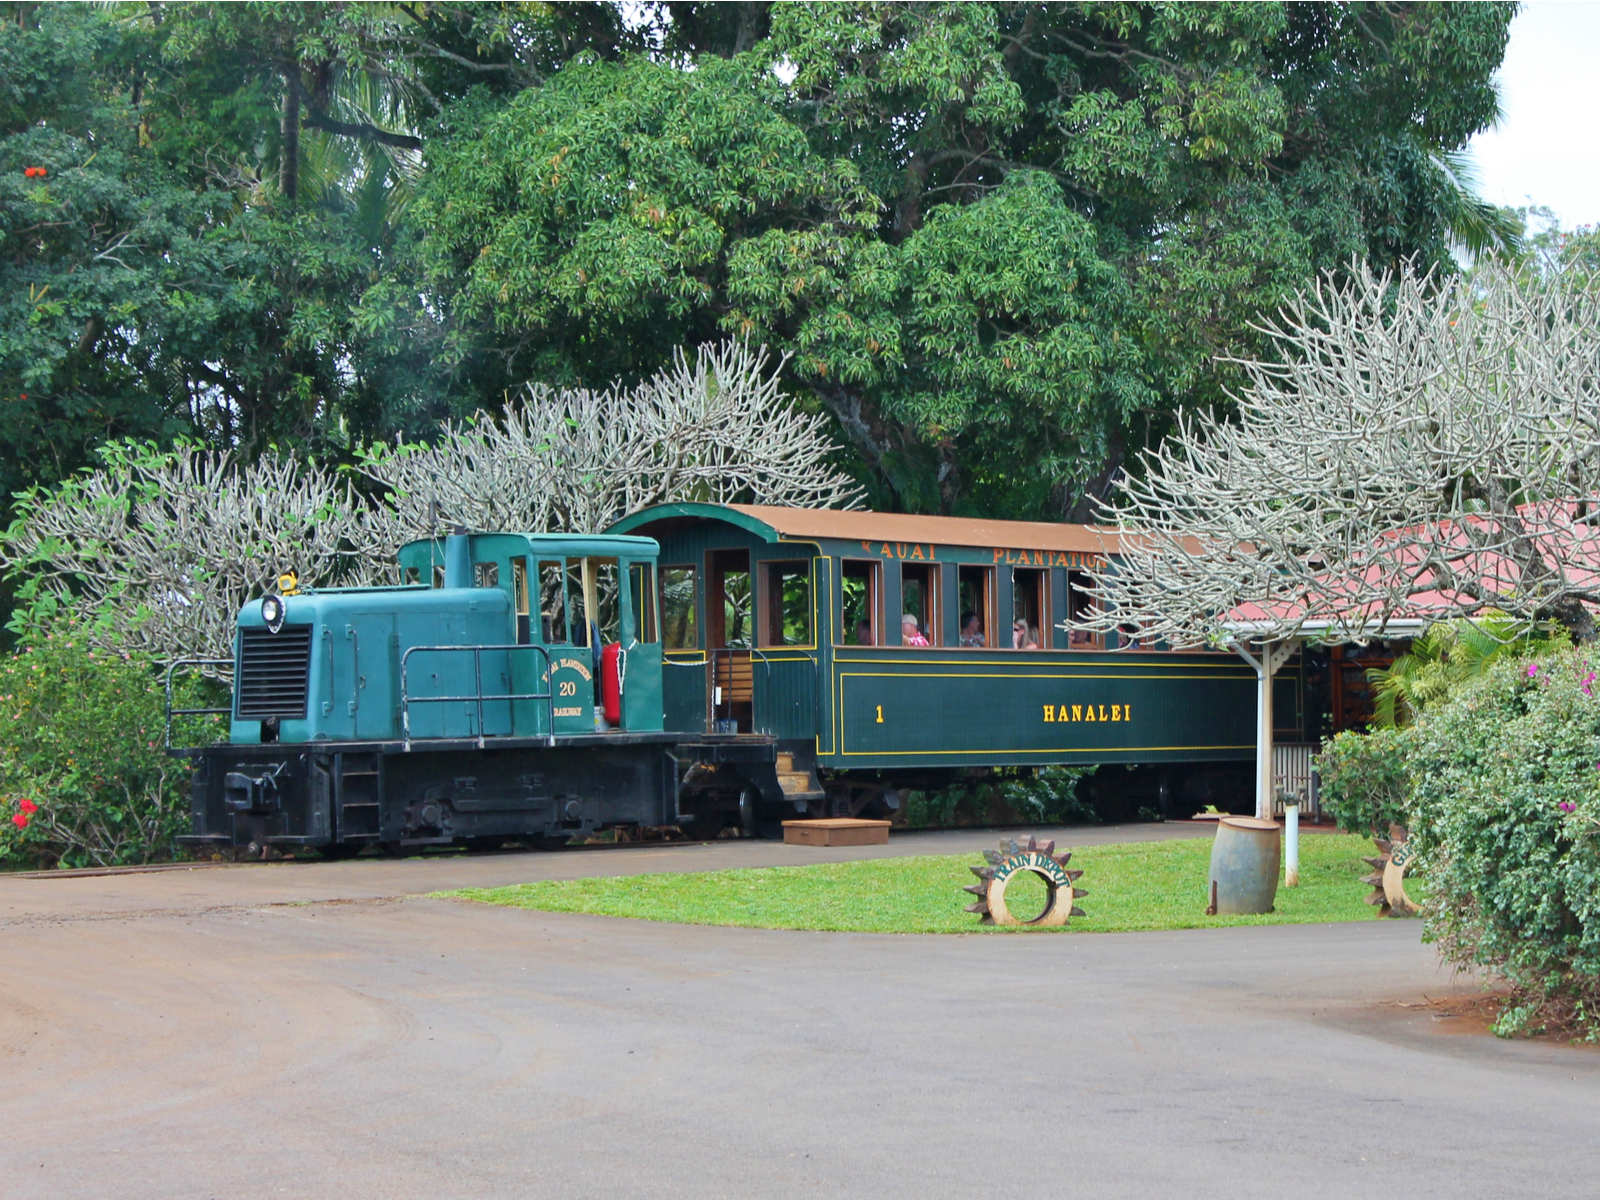 A classic passenger train stopping by at a waiting station, one of the best things to do in Kauai